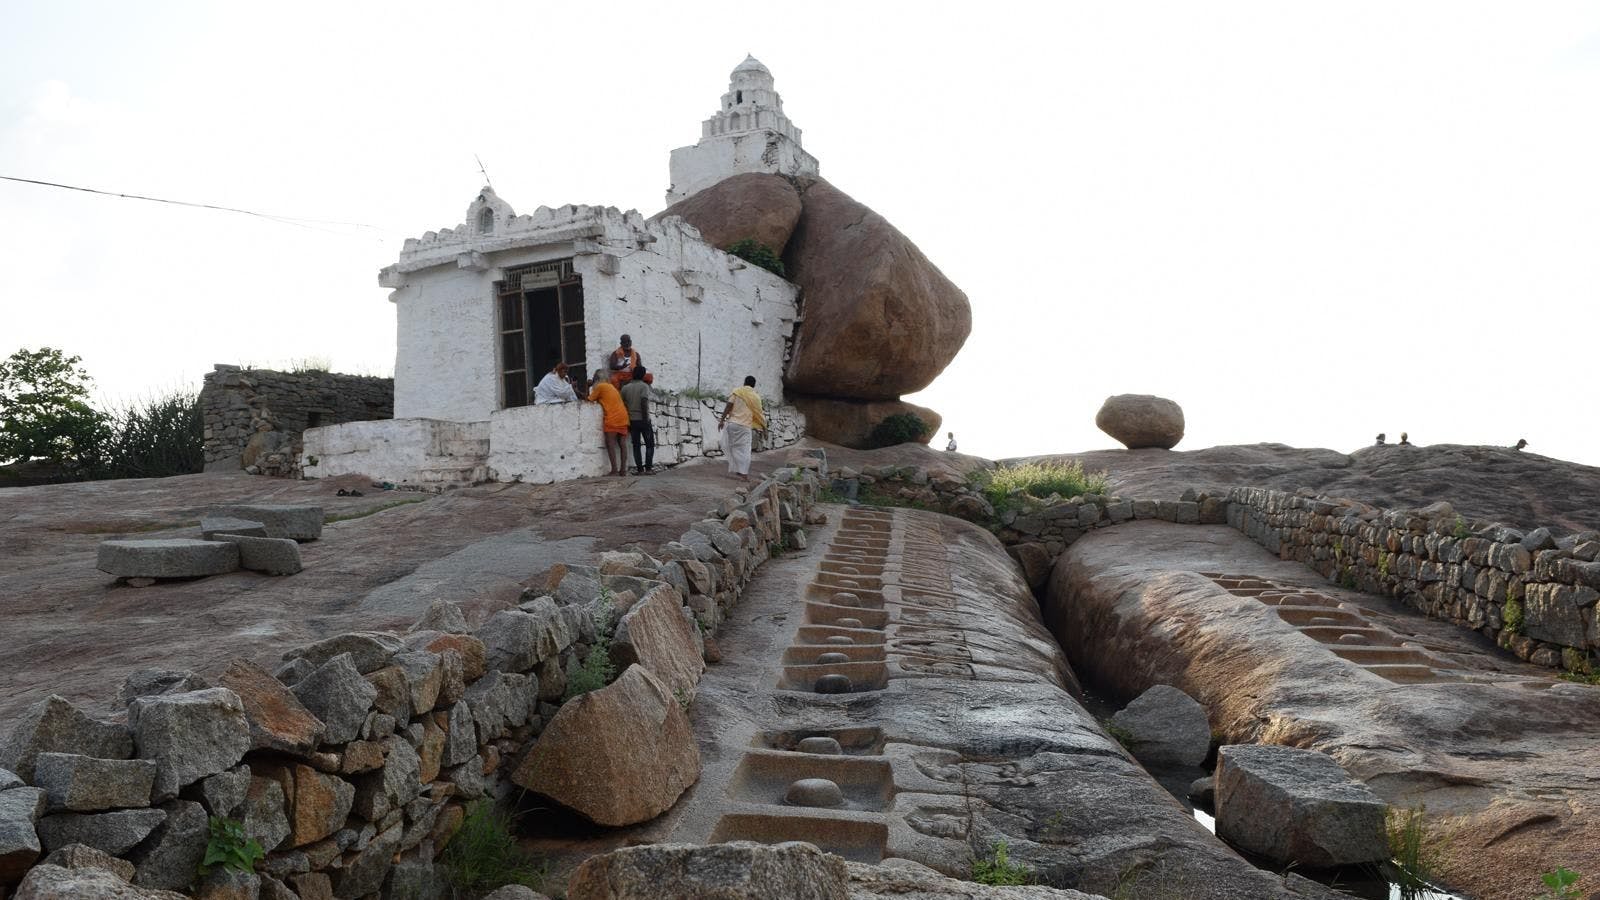 Shiva Temple and fissure created by Lakshman, Malyavanta Hill